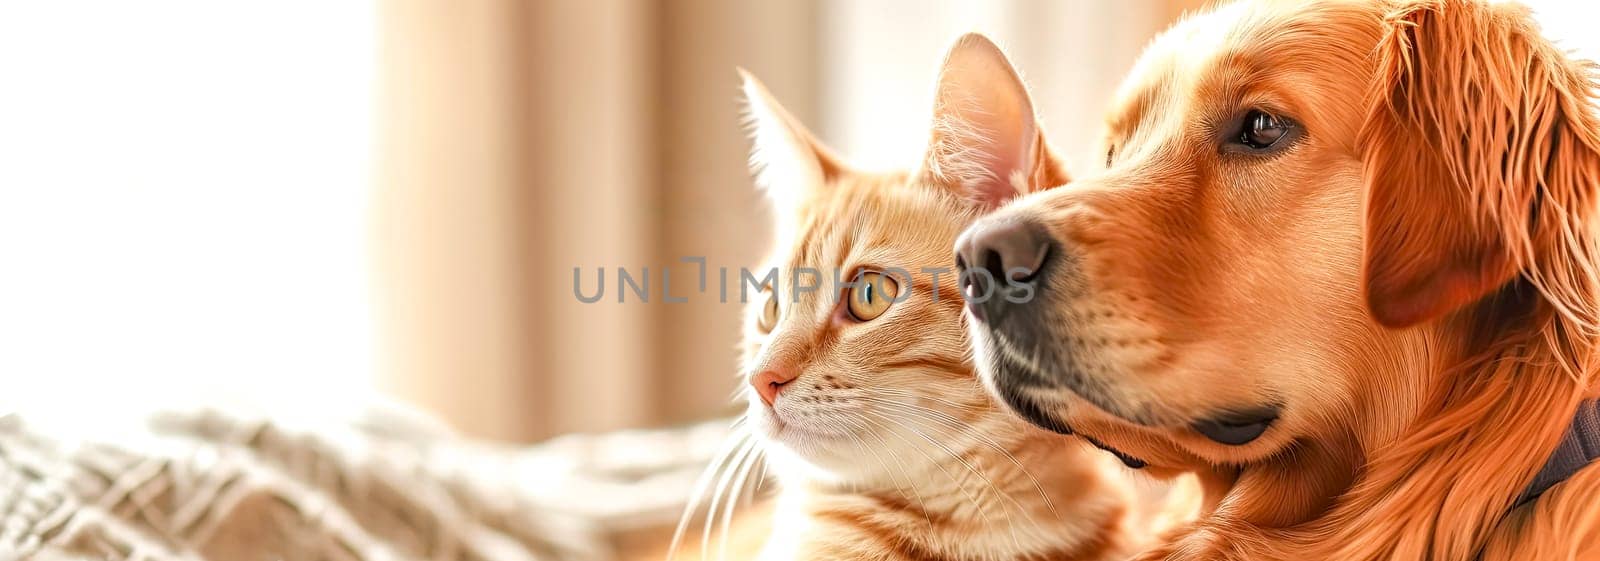 ginger tabby cat and a golden retriever dog side by side in a warm, intimate setting, suggesting a peaceful coexistence and friendship between two different animal species. banner with copy space